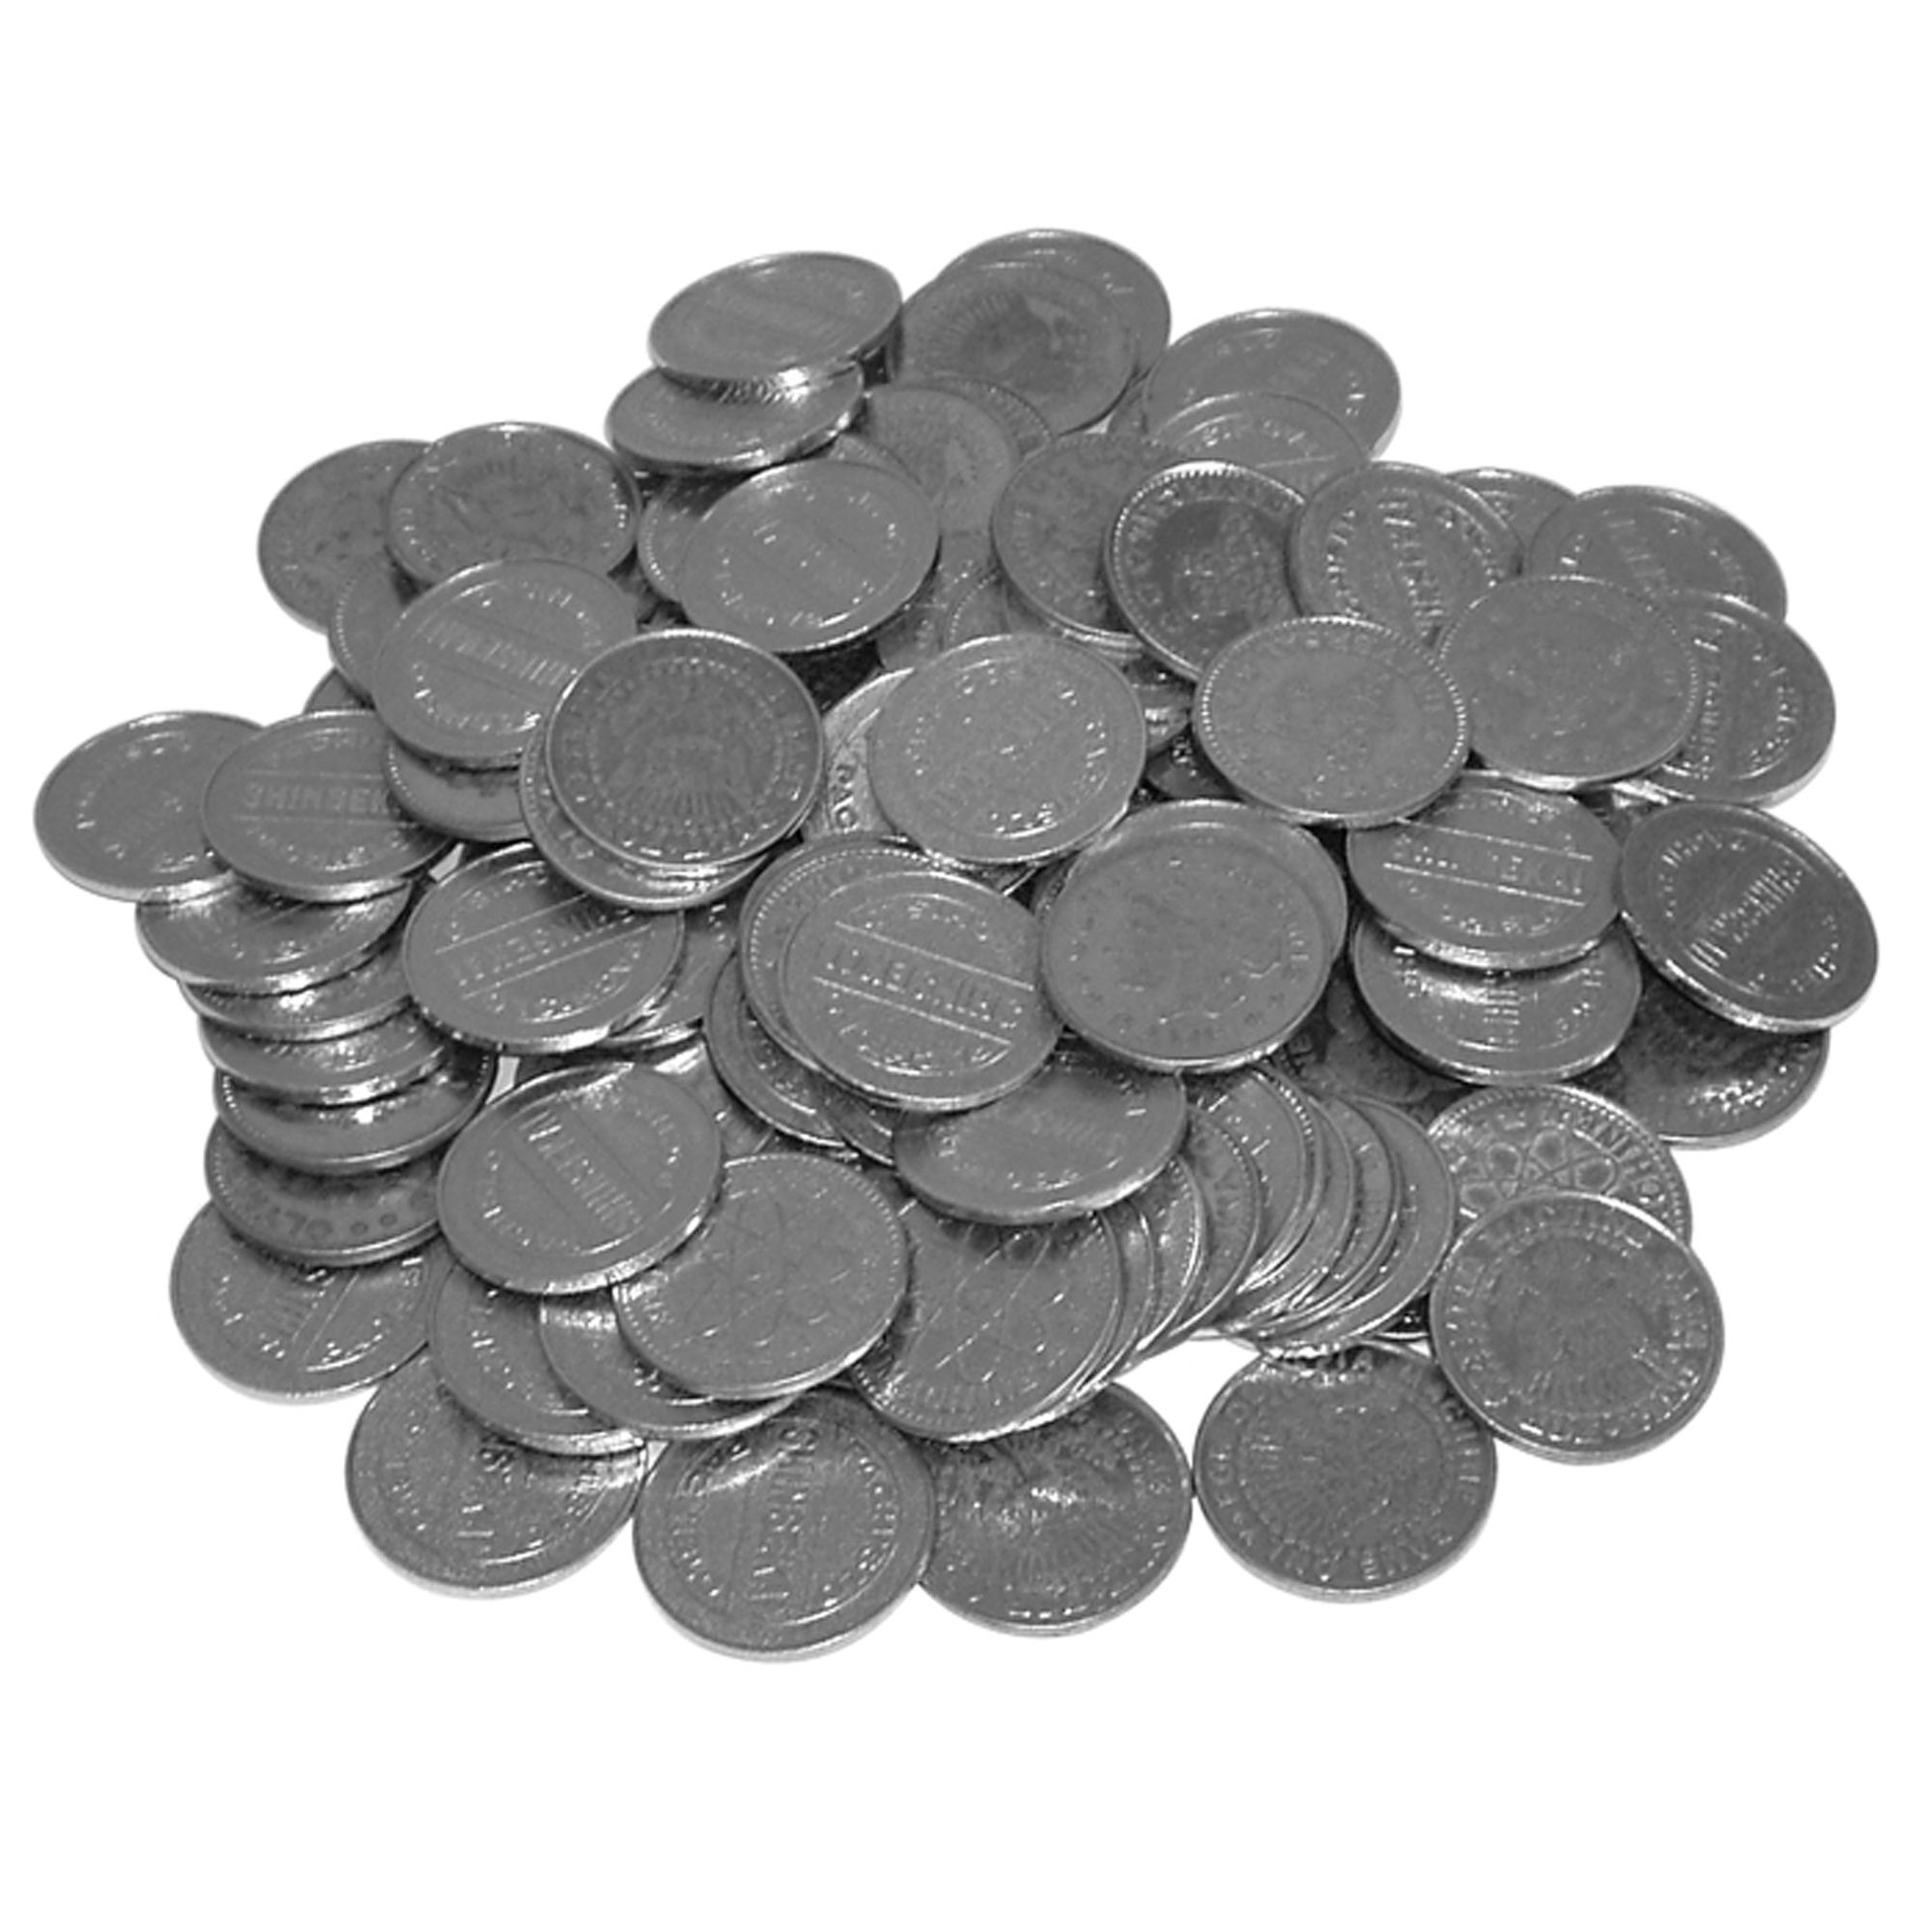 Trademark 500 pack of tokens for slot machines